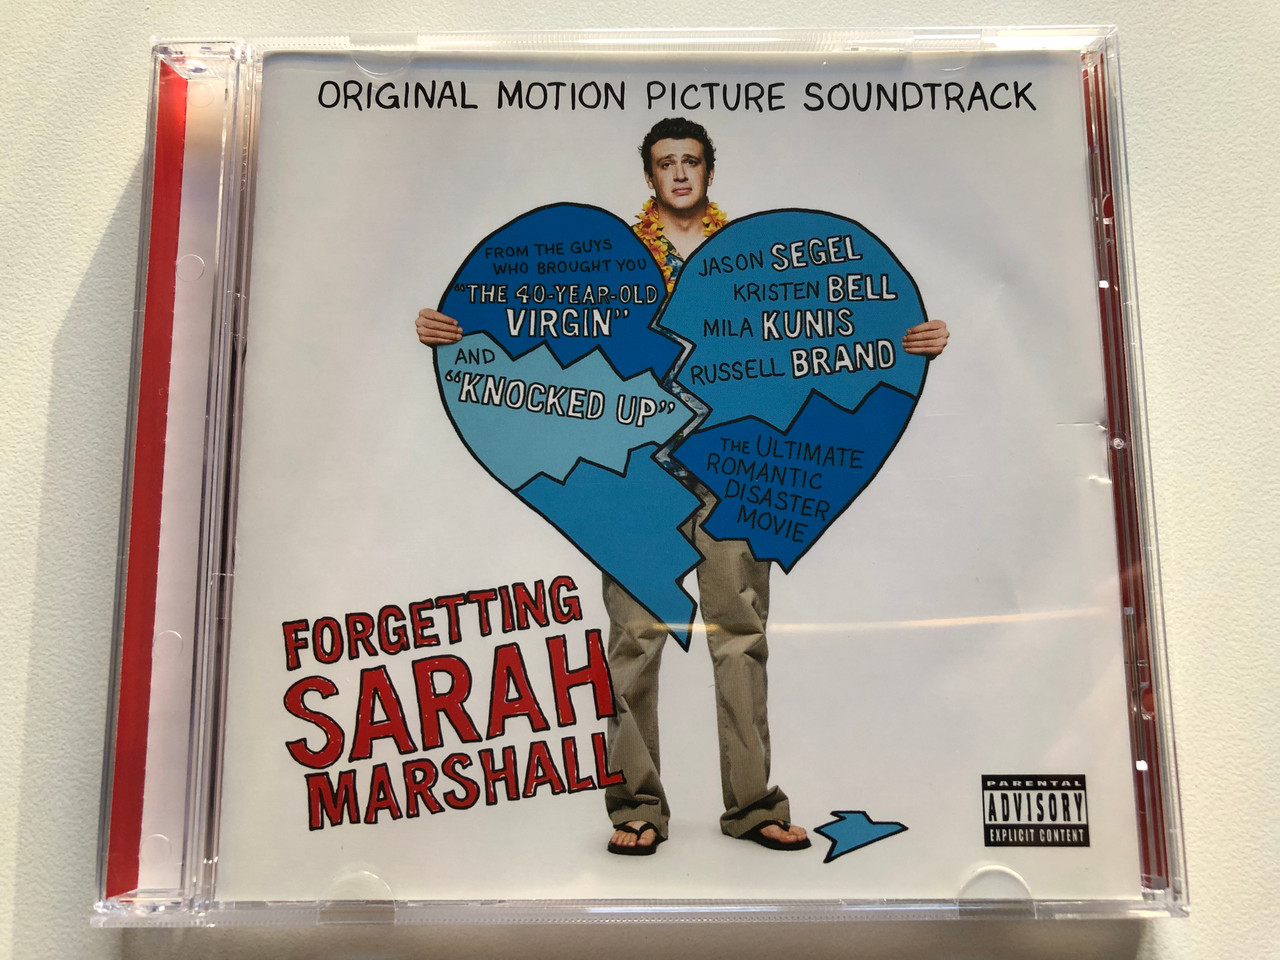 https://cdn11.bigcommerce.com/s-62bdpkt7pb/products/0/images/321040/Forgetting_Sarah_Marshall_Original_Motion_Picture_Soundtrack_-_From_The_Guys_Who_Bought_You_The_40-year-old_Virgin_And_Knocked_Up_-_Jeason_Segel_Kristen_Bell_Mila_Kunis_Russell_Br_1__97429.1704874799.1280.1280.JPG?c=2